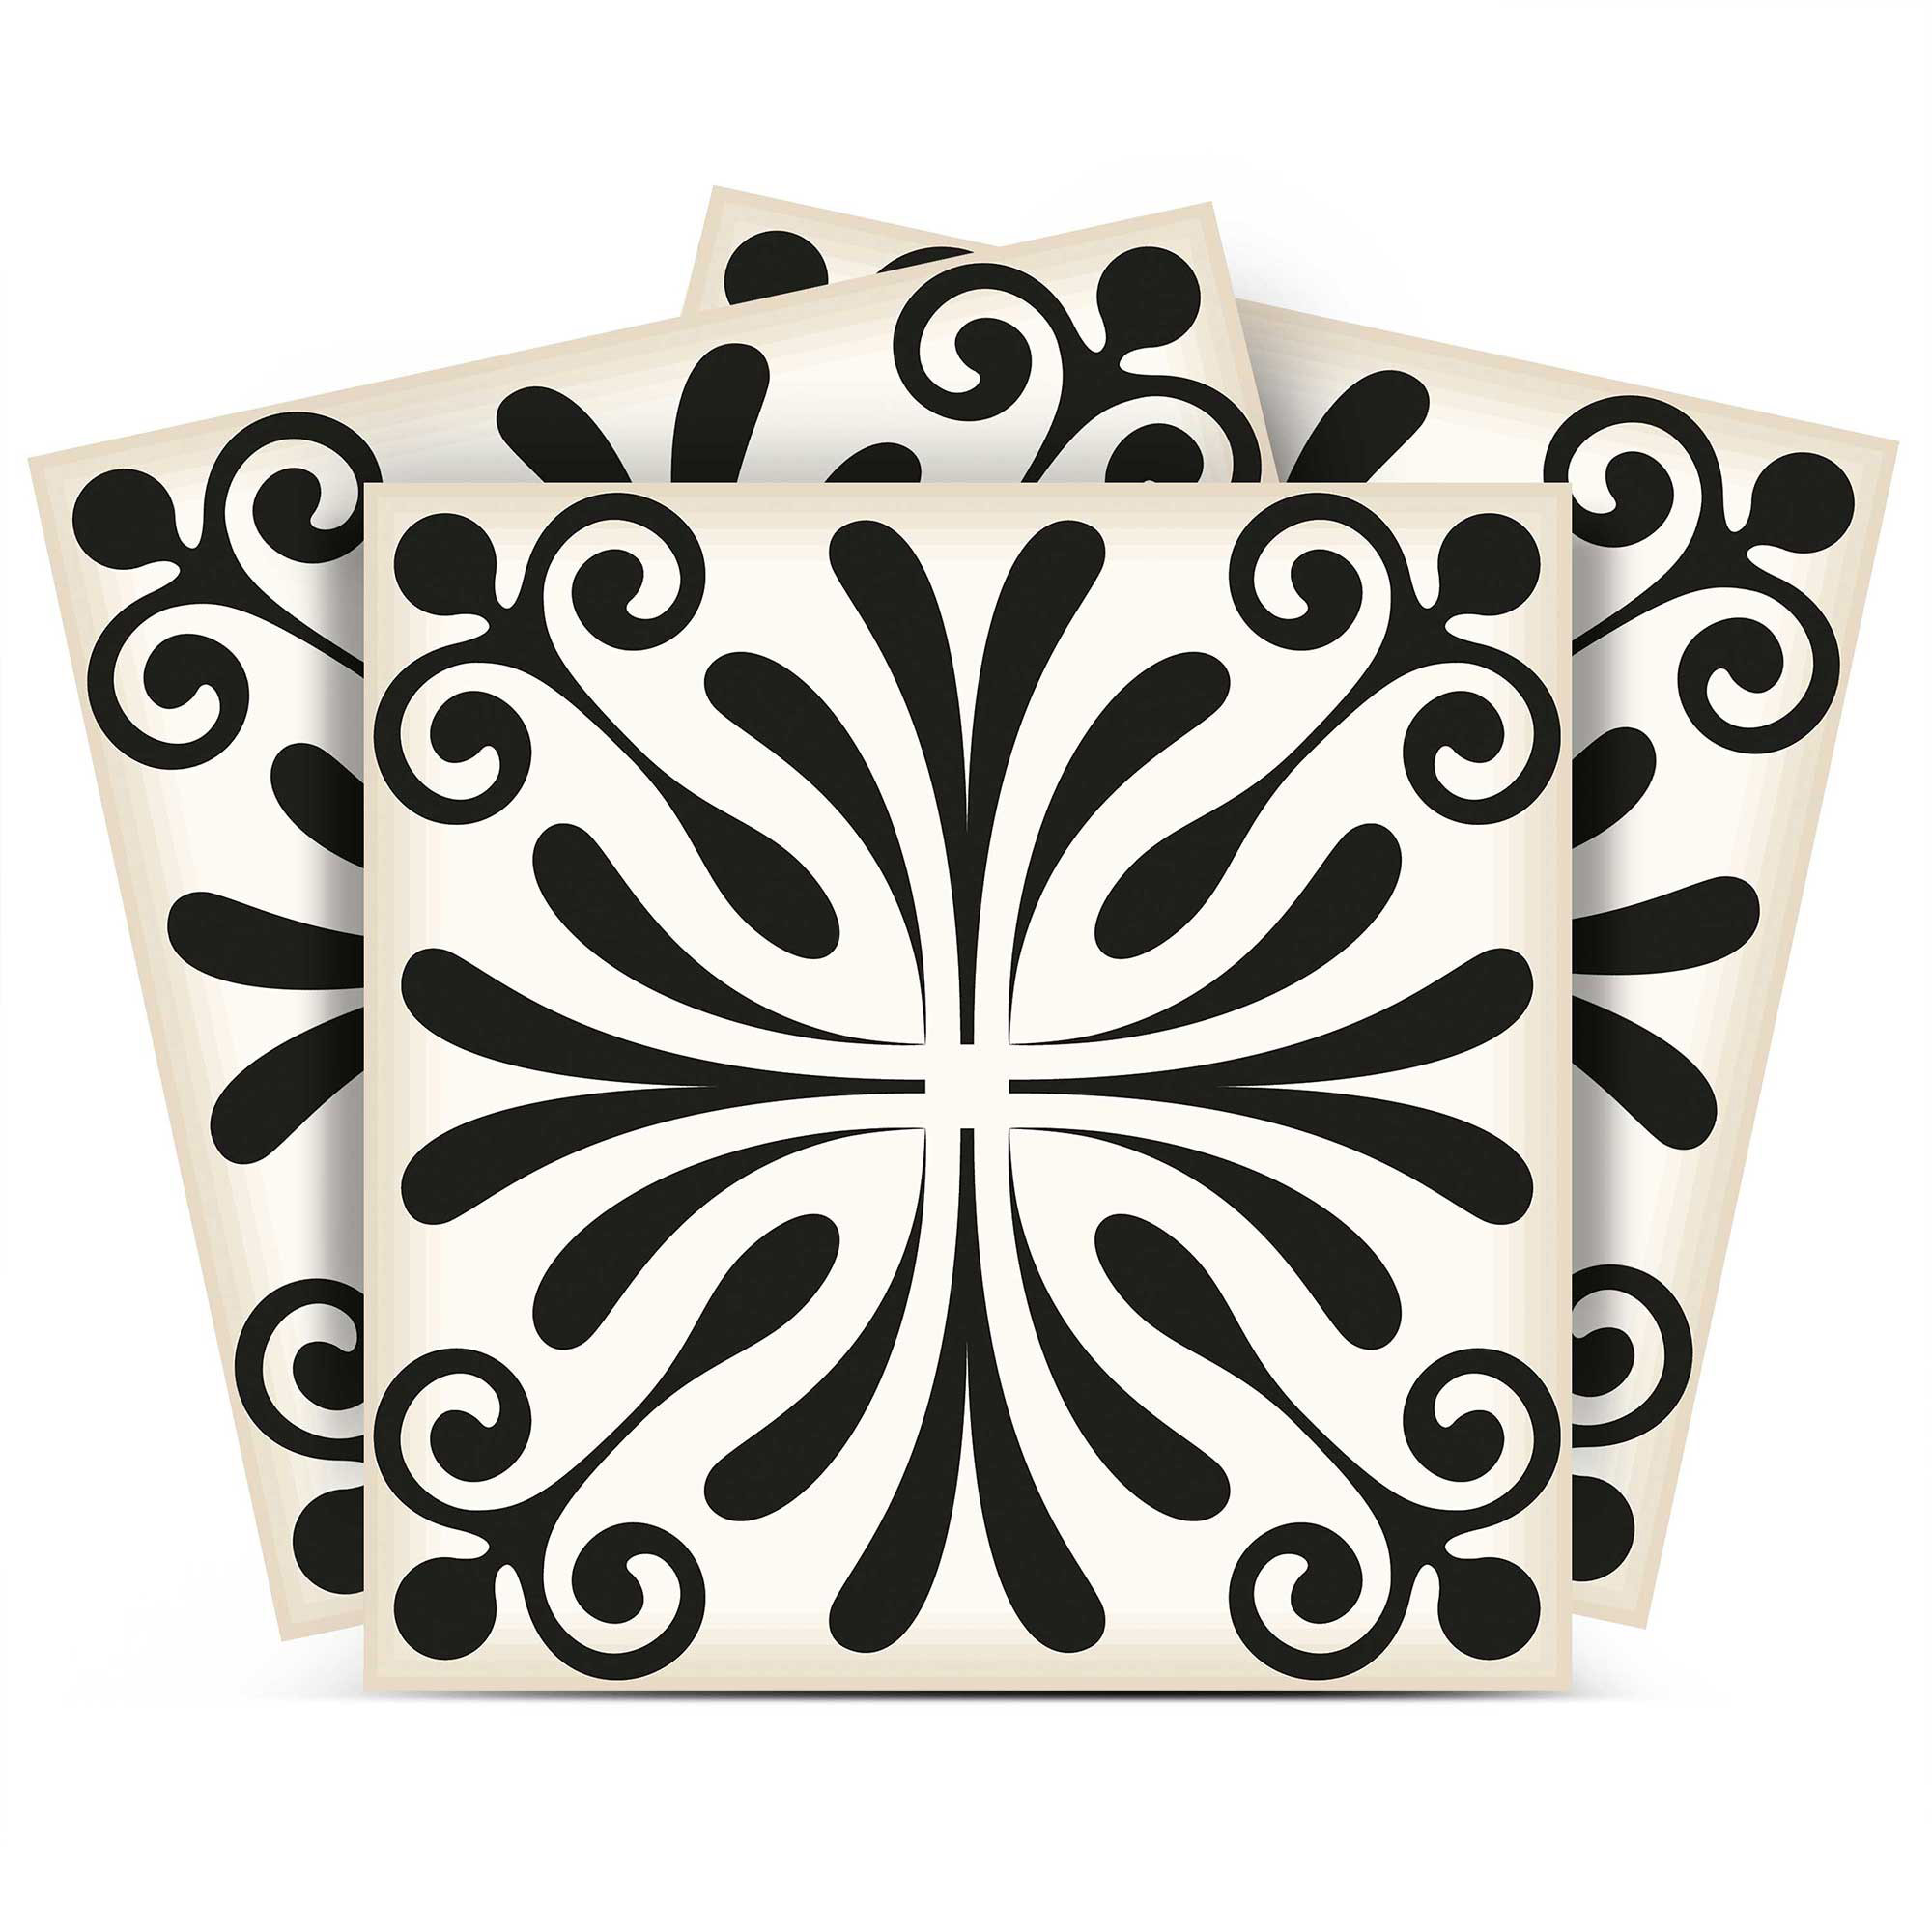 7" X 7" Black and White Flo Peel and Stick Removable Tiles-399953-1